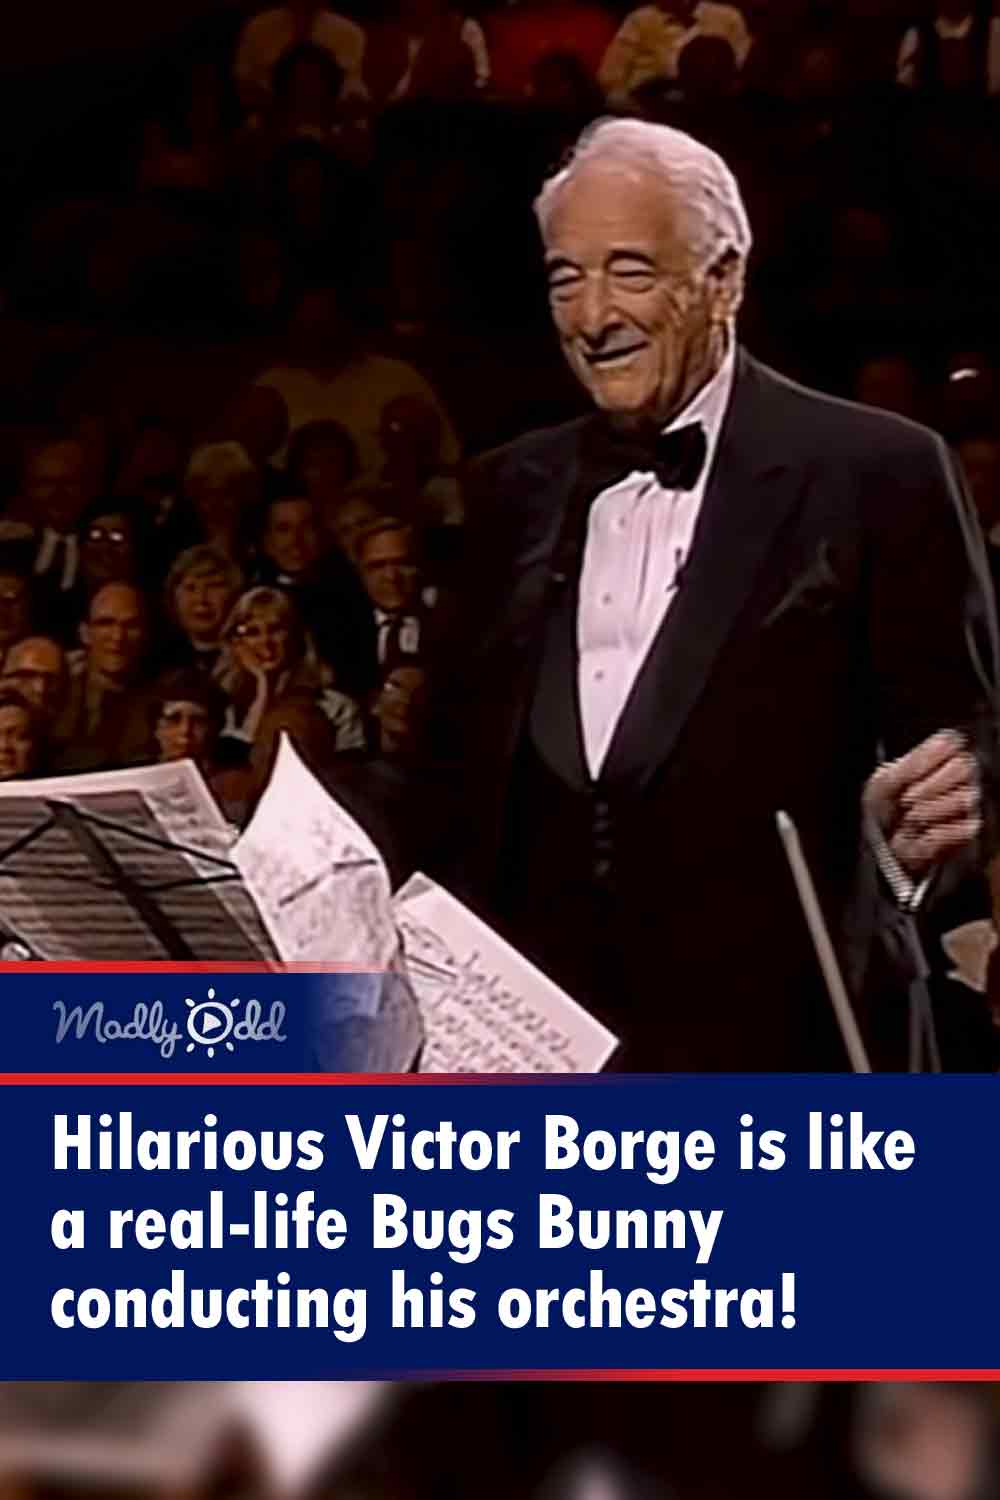 Hilarious Victor Borge is like a real-life Bugs Bunny conducting his orchestra!